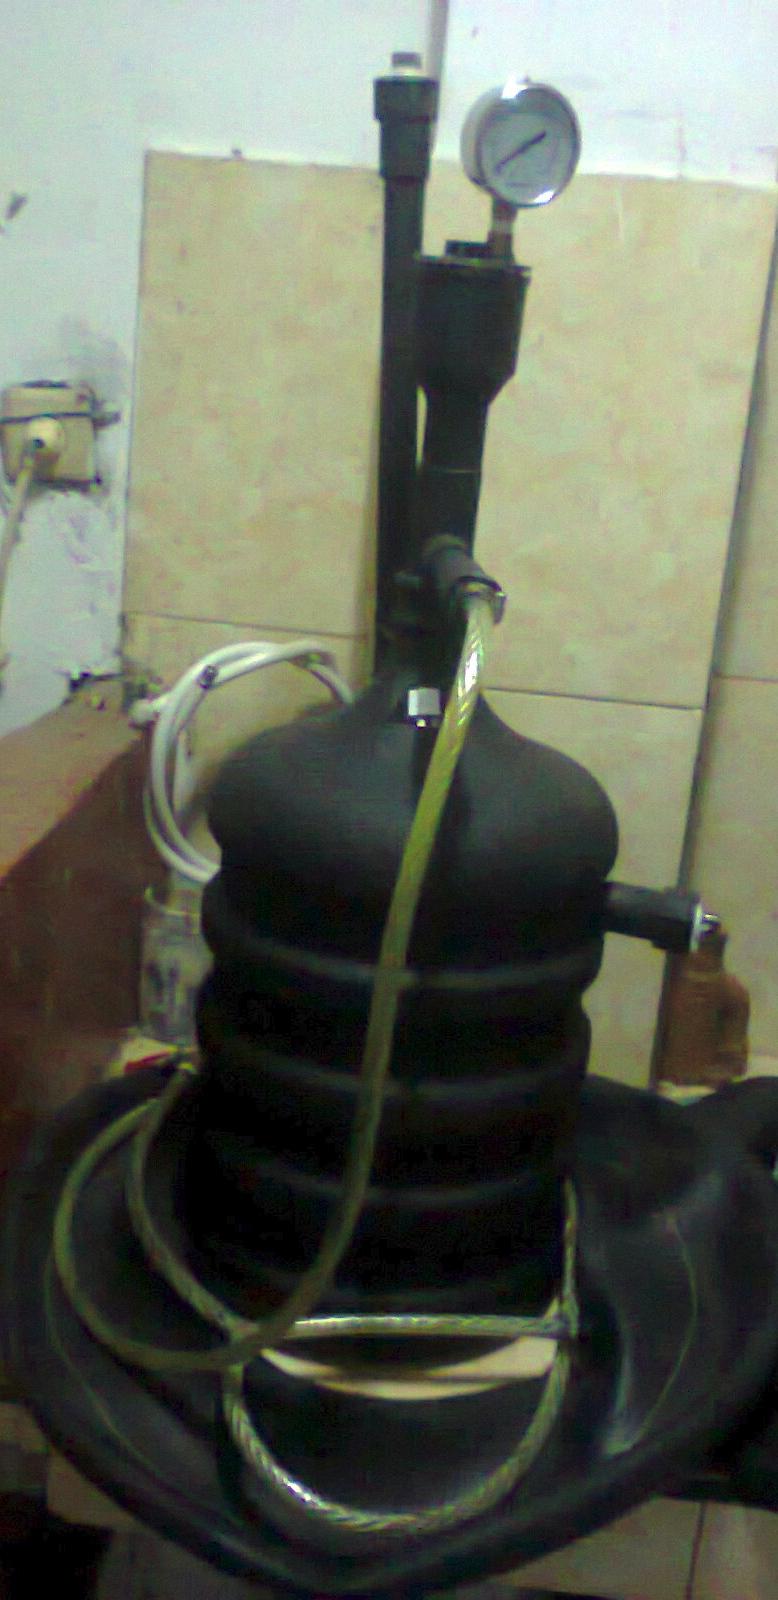 6th Asian Physics Symposium 2. Materials and method Materials used to make this mini sized biogas plant is a 19 liters gallon, and some other equipment such as socket, nipples, and PVC.